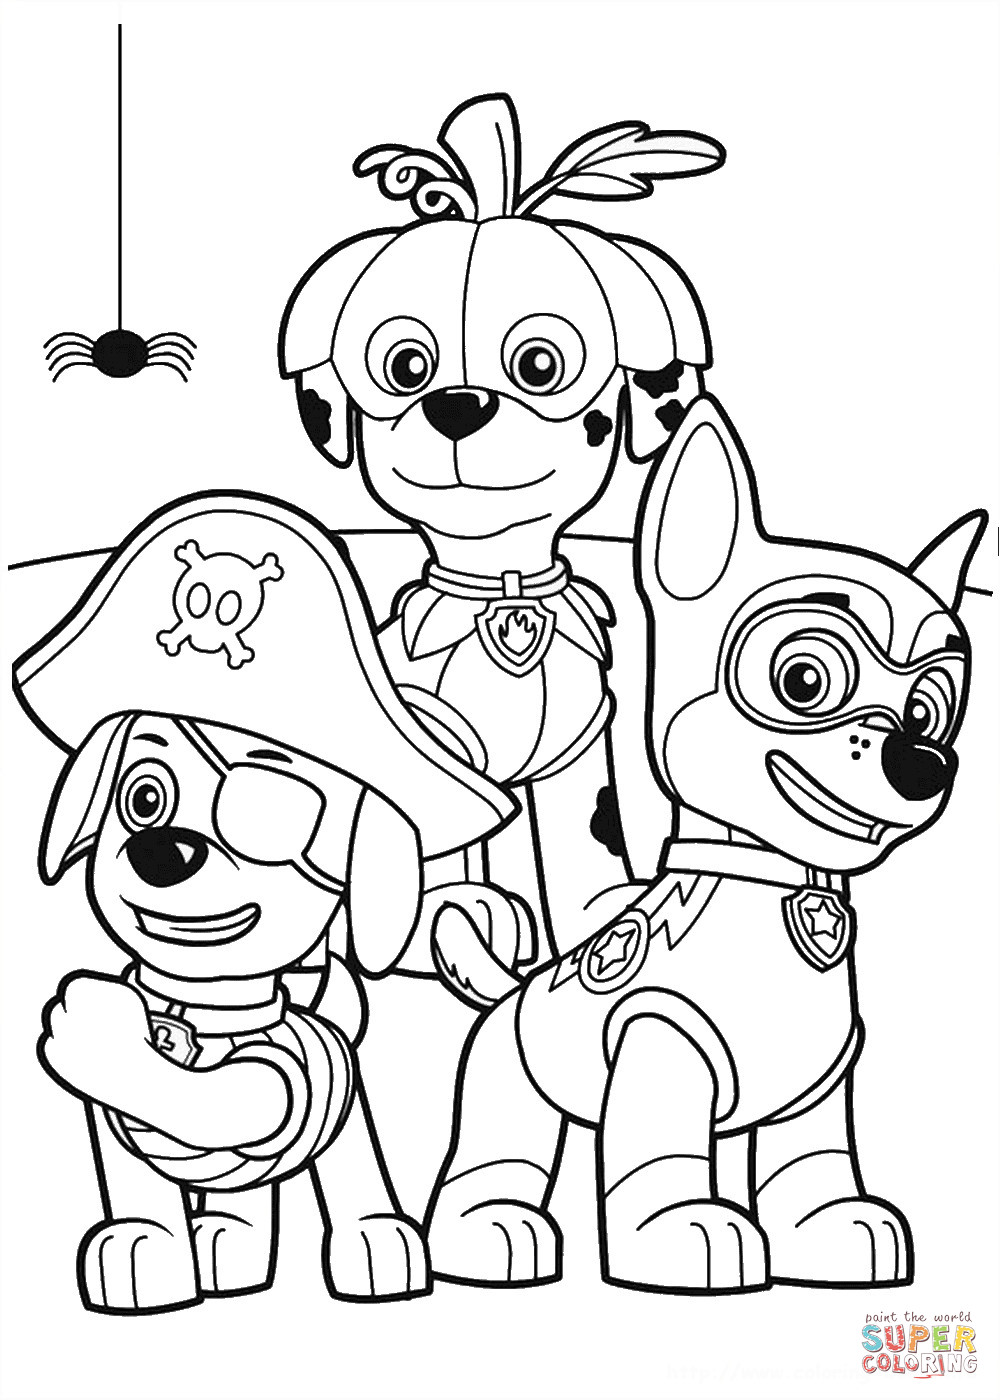 Free Printable Coloring Pages Paw Patrol
 Paw Patrol Halloween Party coloring page